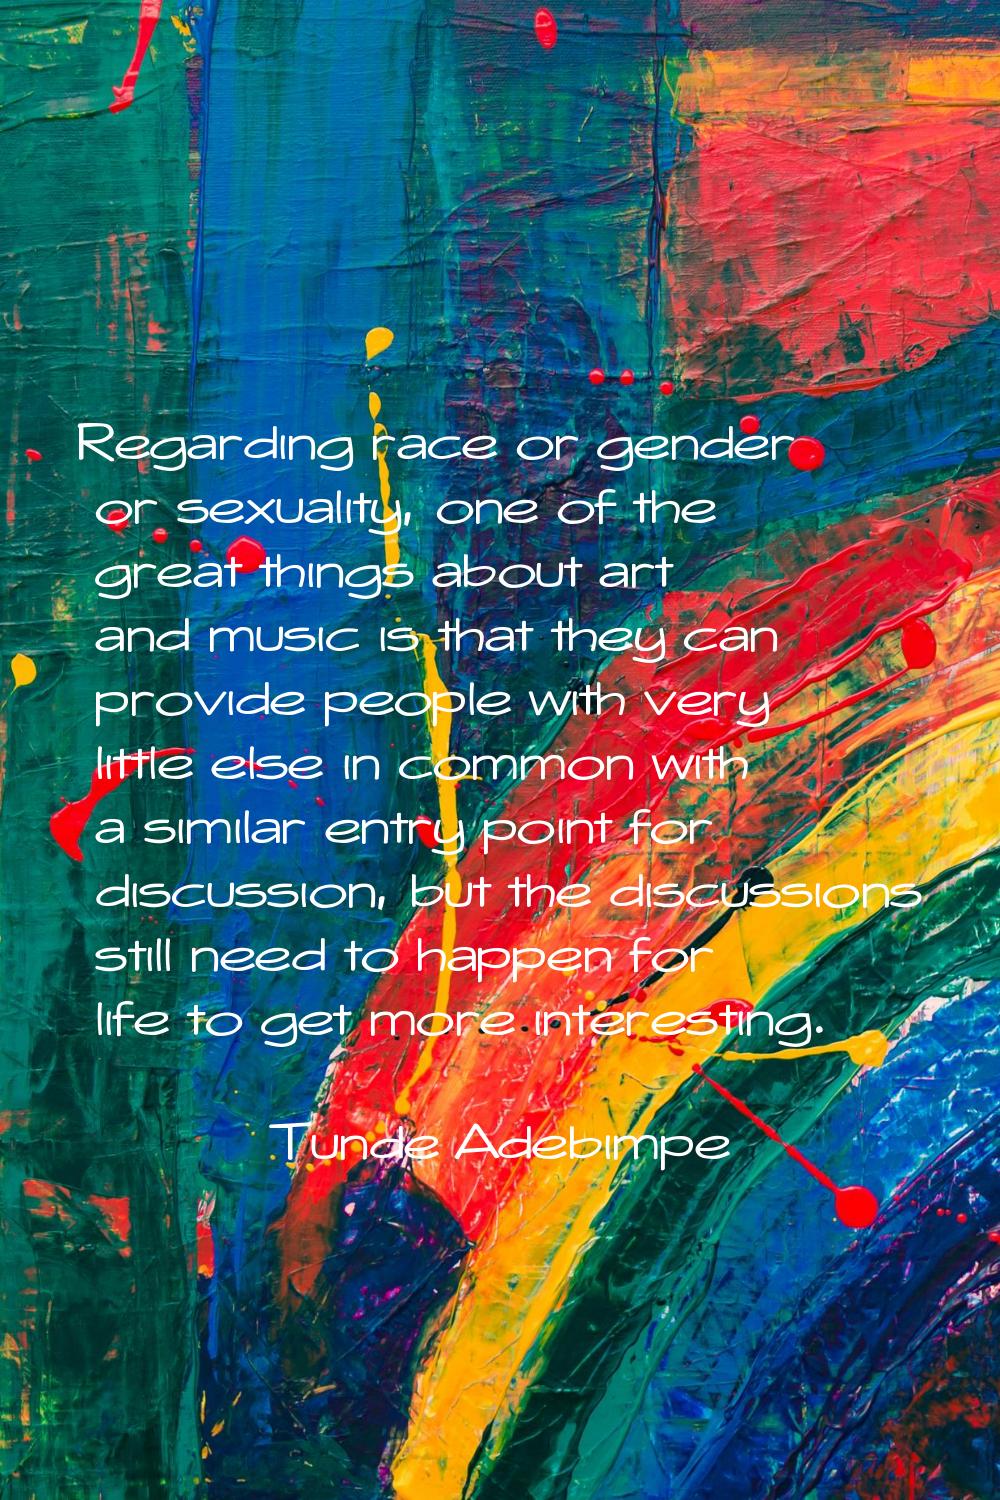 Regarding race or gender or sexuality, one of the great things about art and music is that they can